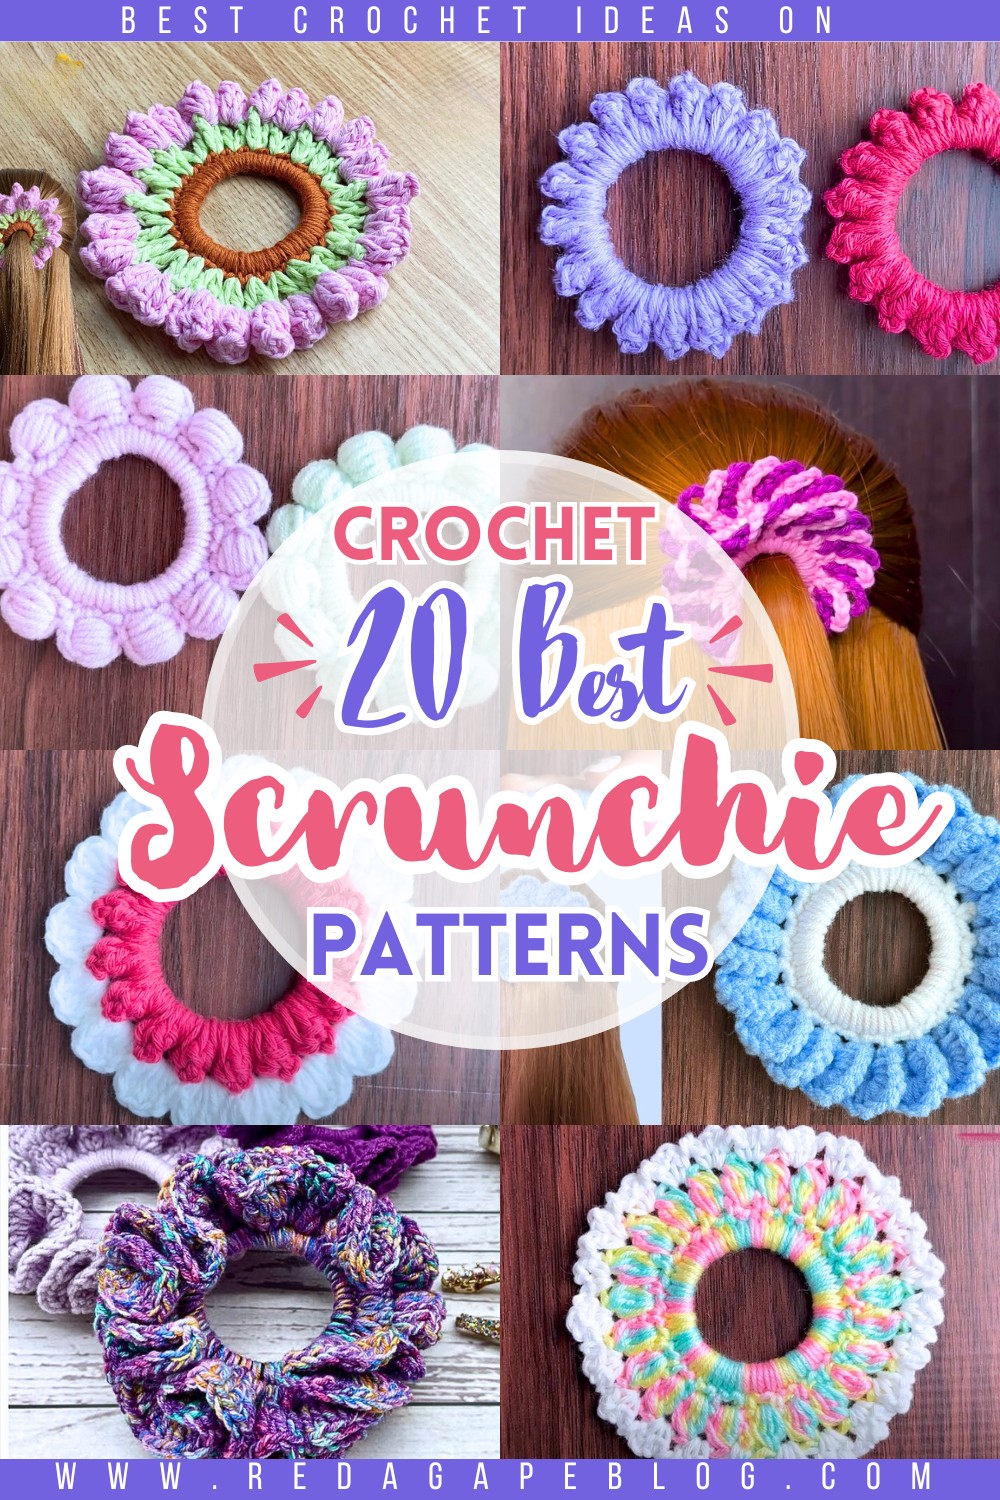 Free Crochet Scrunchie Patterns For Stylized Hair Management!